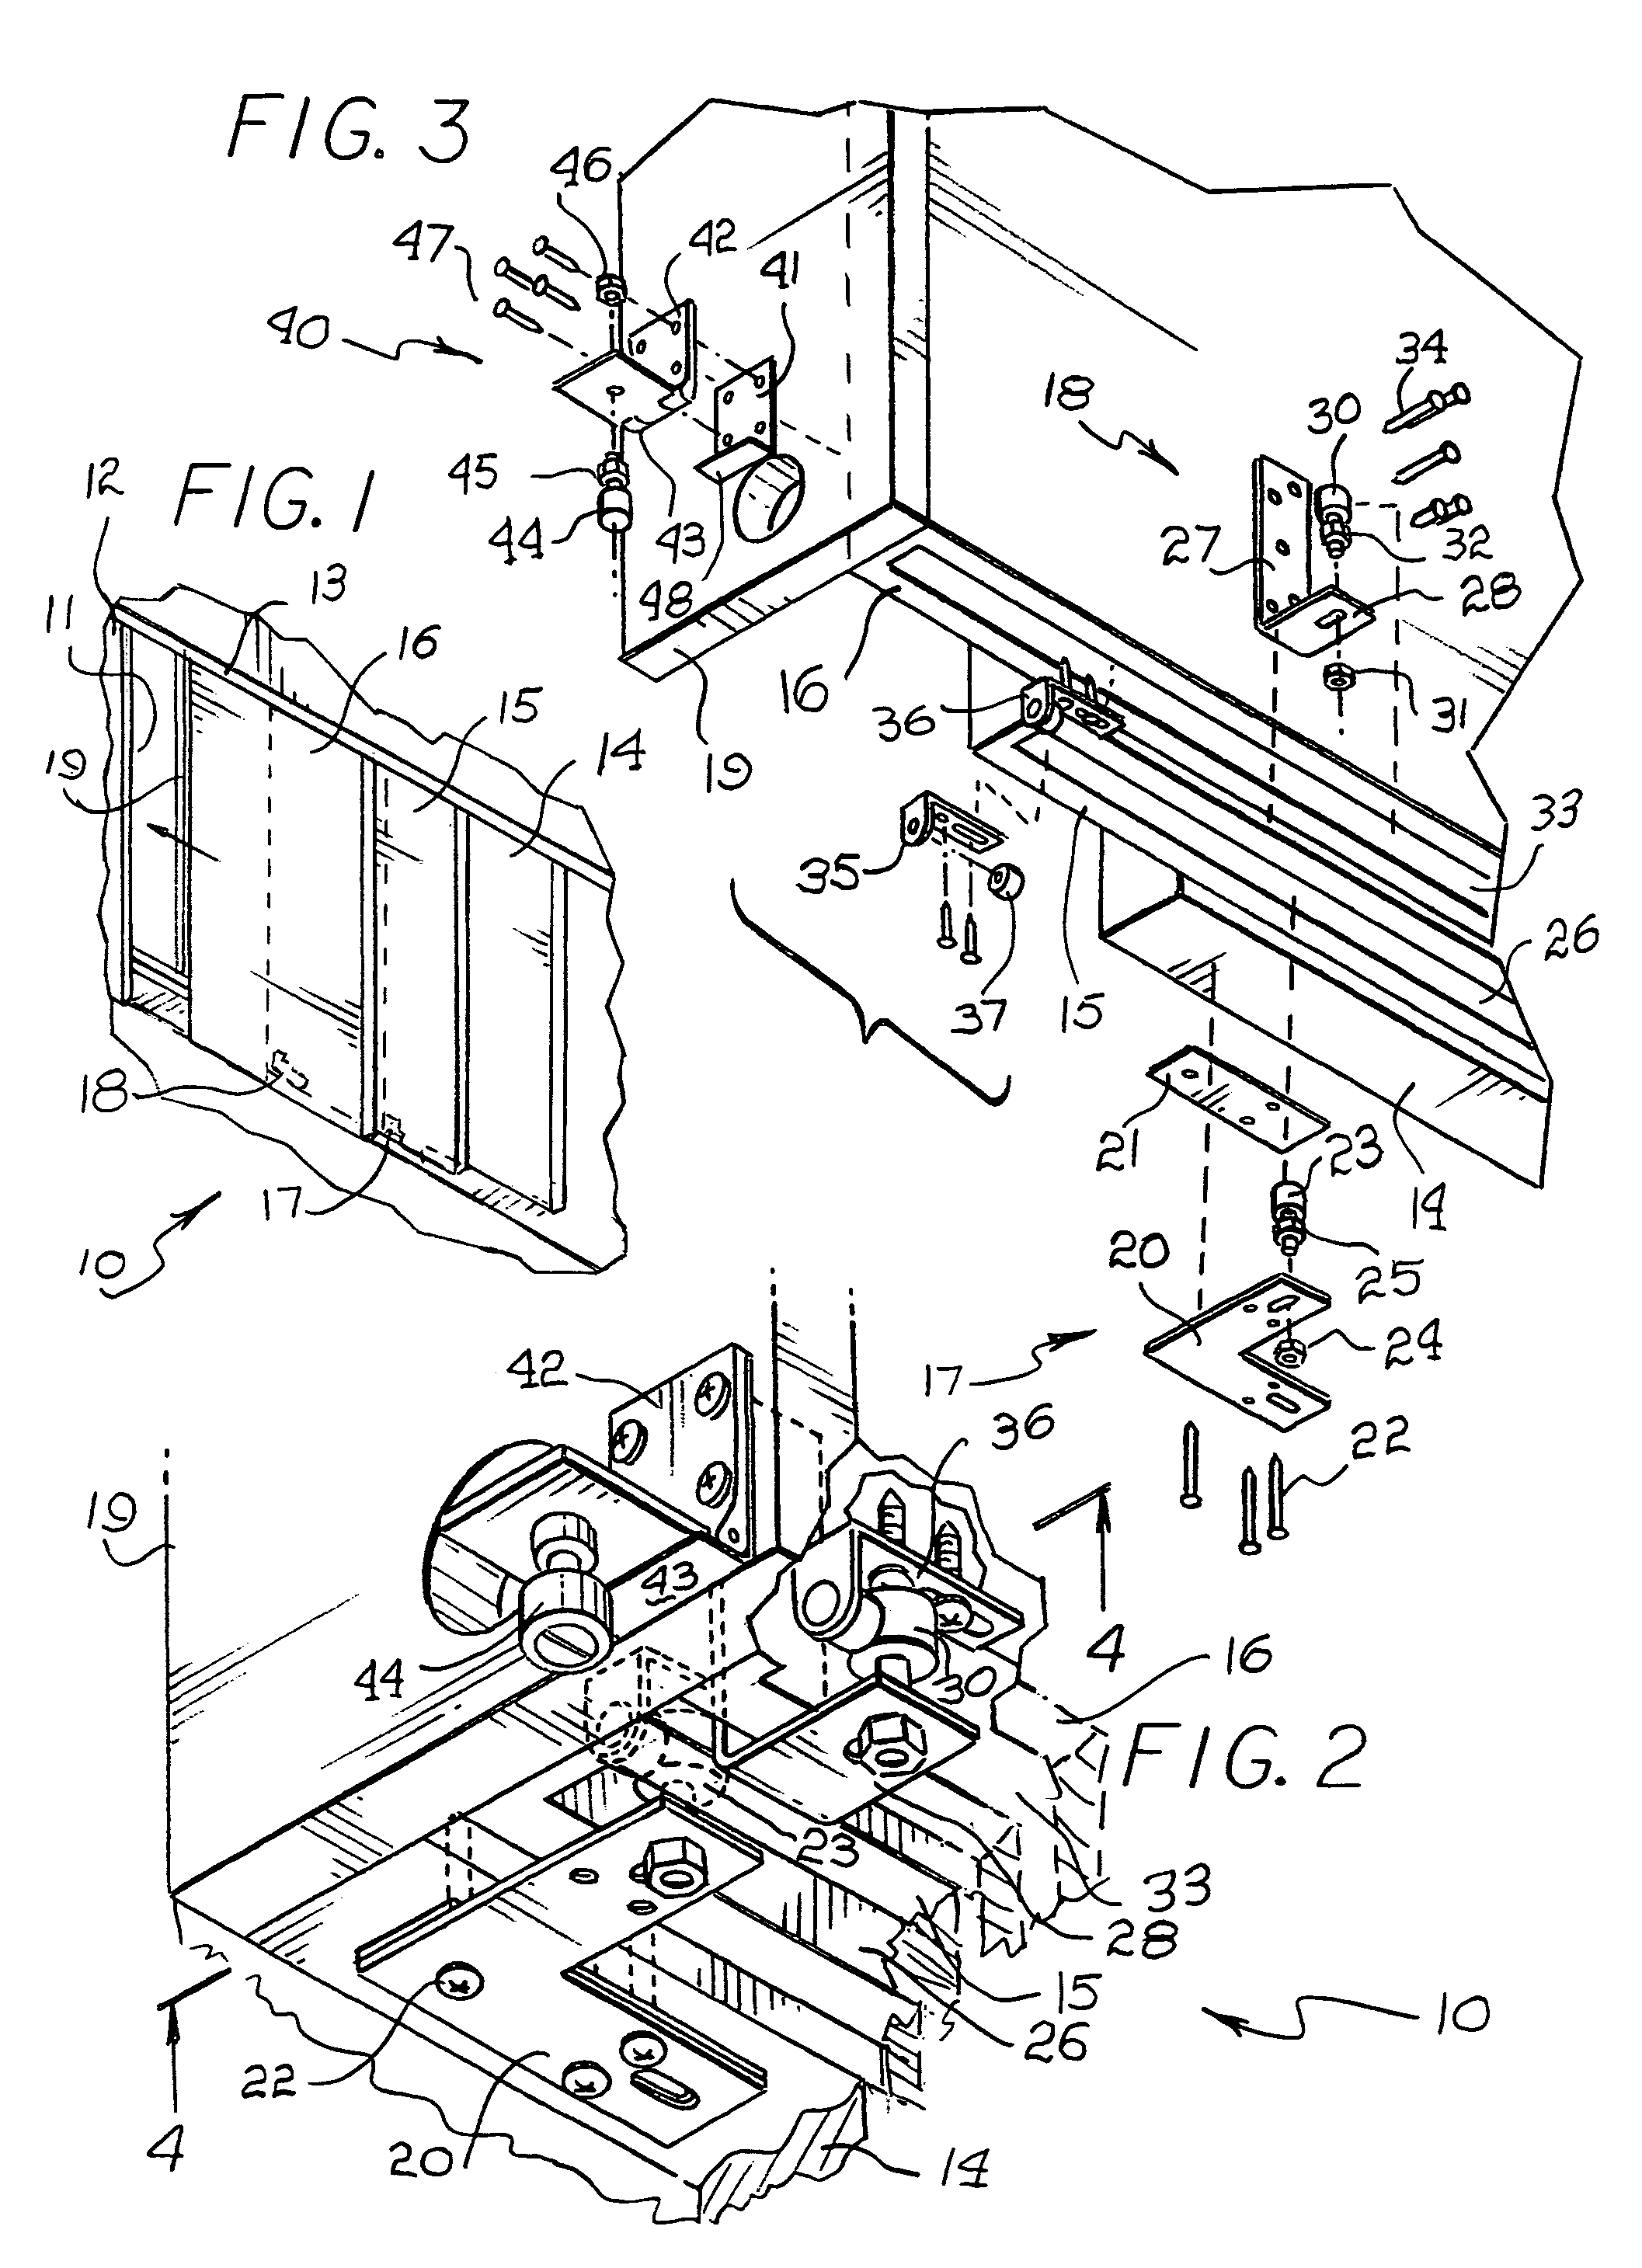 Multiple door joining assembly